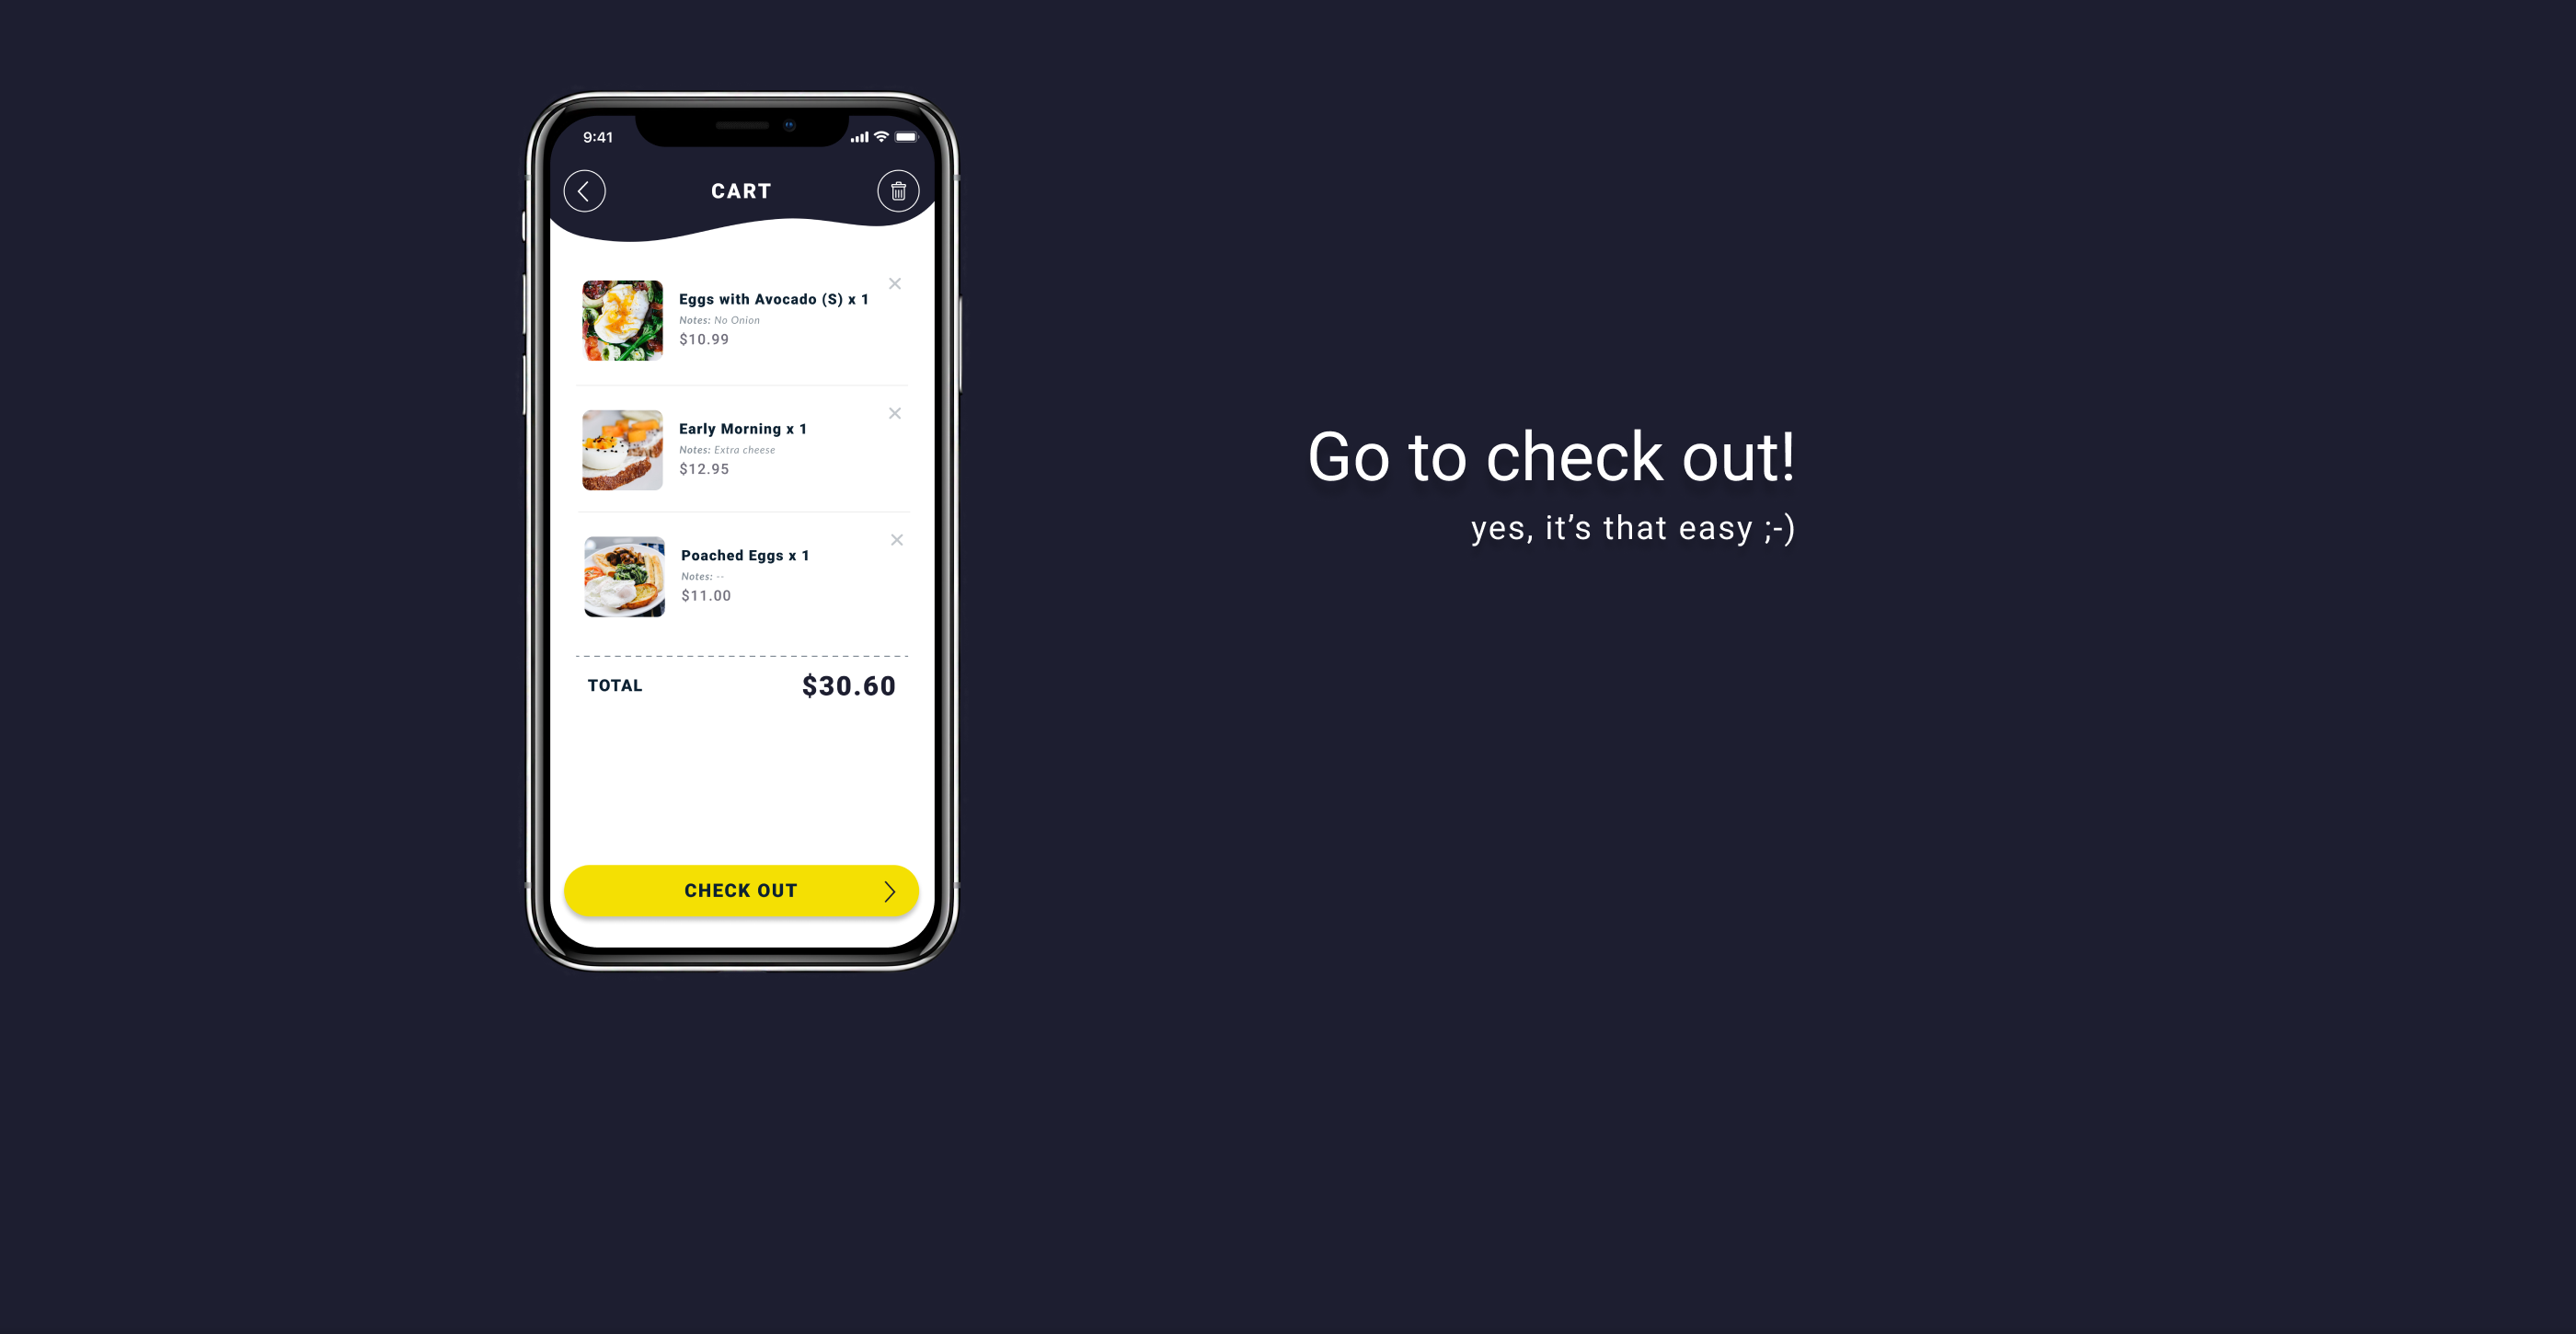 The final image of the delivery app case study showing the design of the checkout process